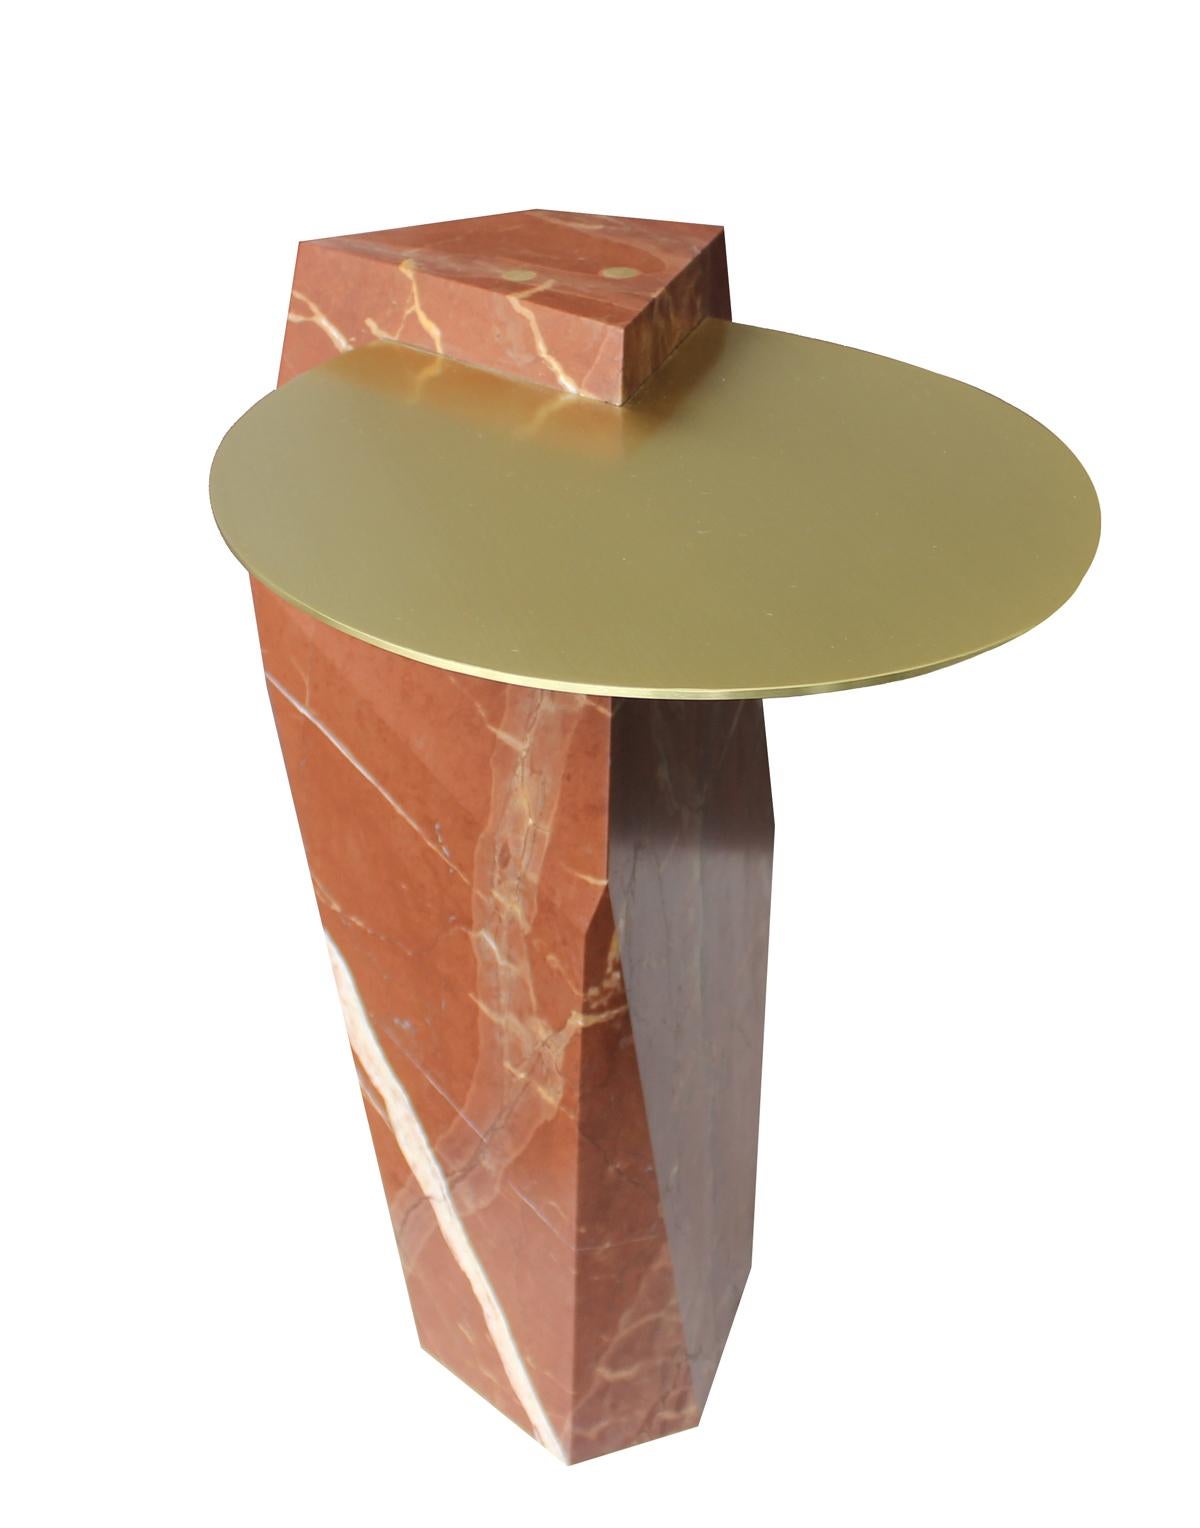 A solid block of Rosso Collemandina marble, quarried in Tuscany, carved and inset with a solid brass tray. Available in a variety of colored marbles and numerous metal options. Can also be made as a dining or console table.